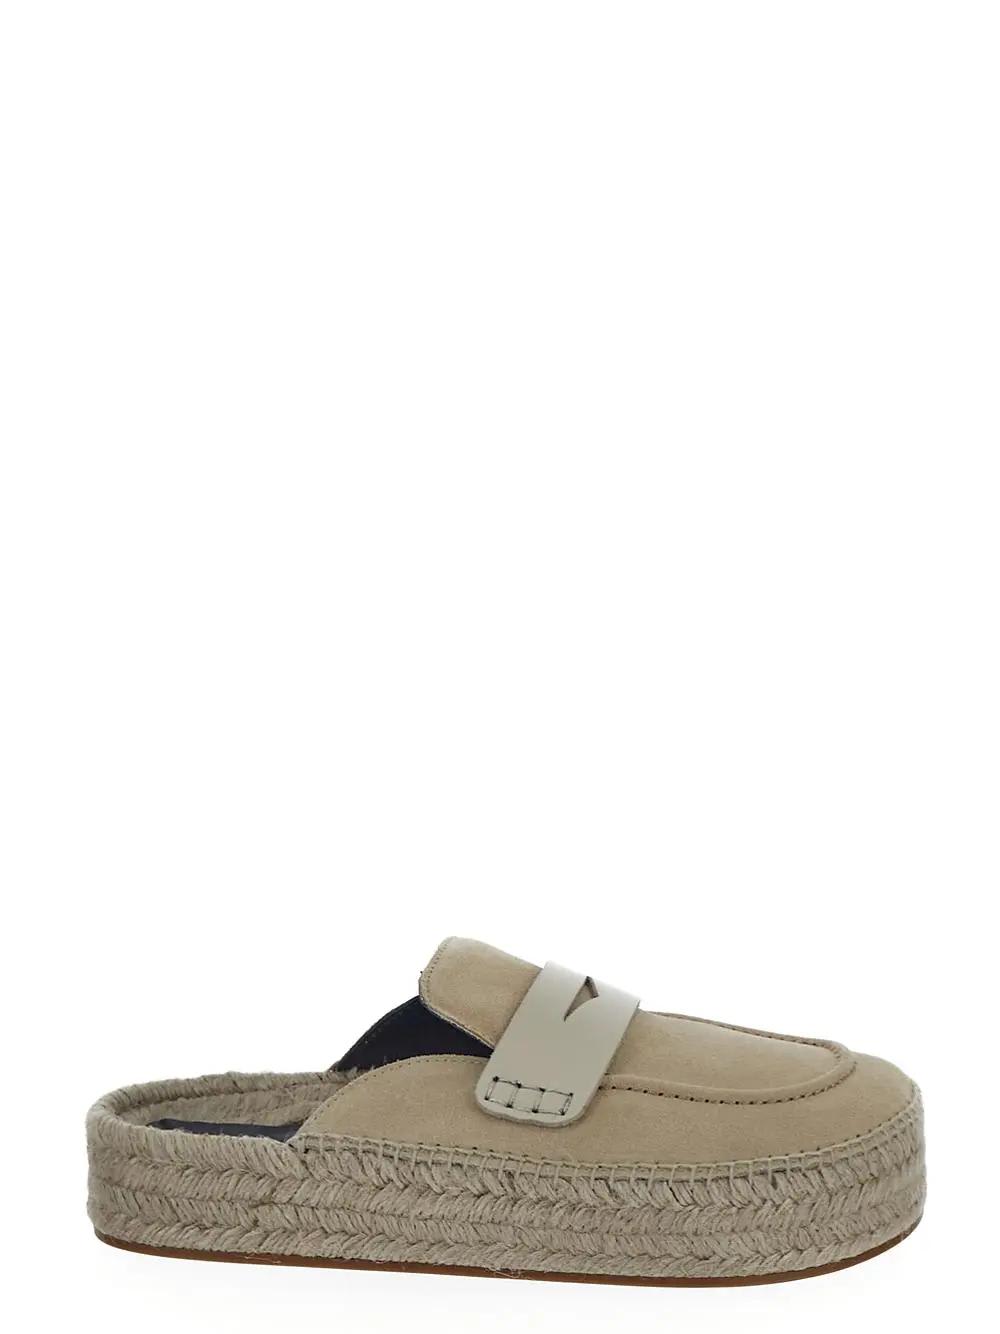 JW ANDERSON ESPADRILLE LOAFER MULES